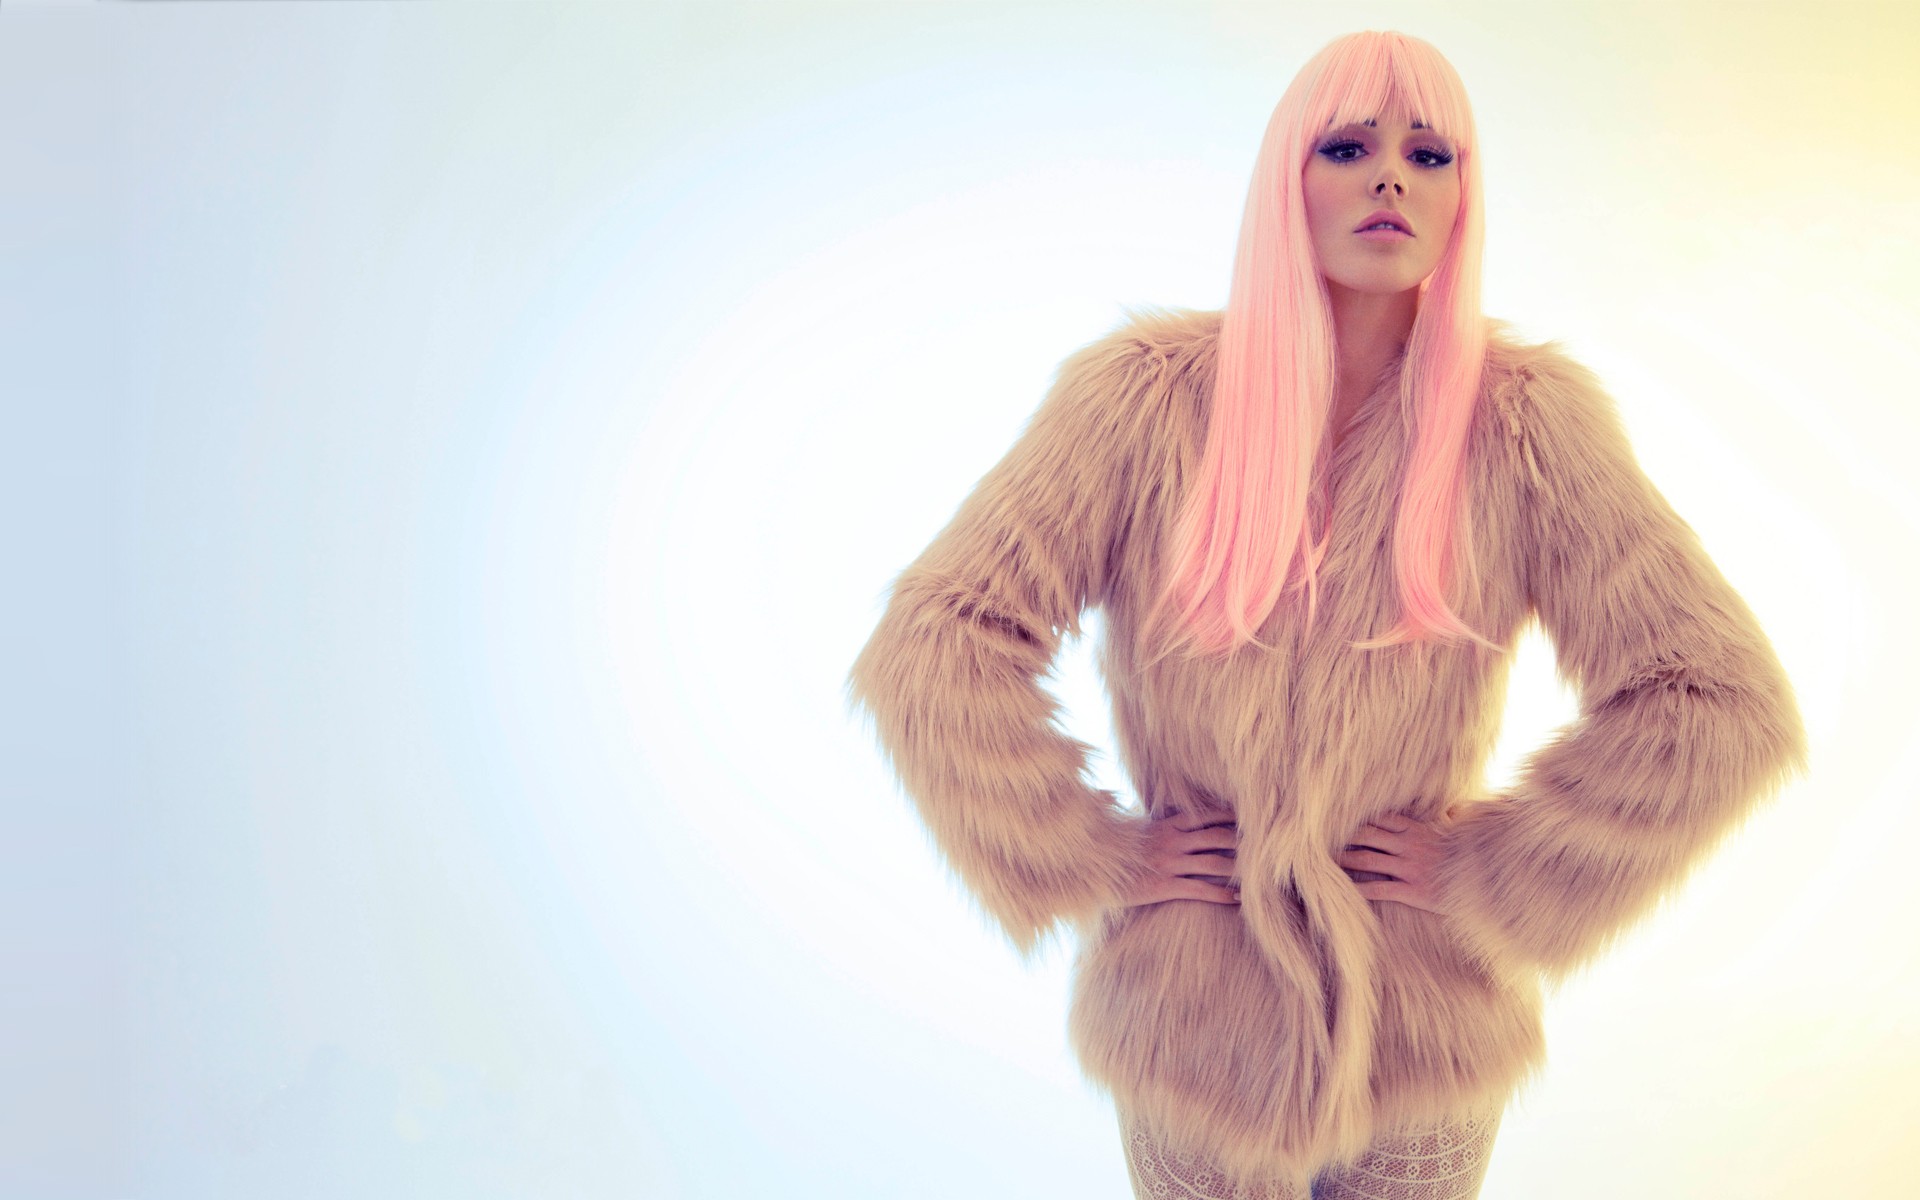 Women Model Pink Hair Simple Background Fur Coats Wigs Hands On Hips 1920x1200